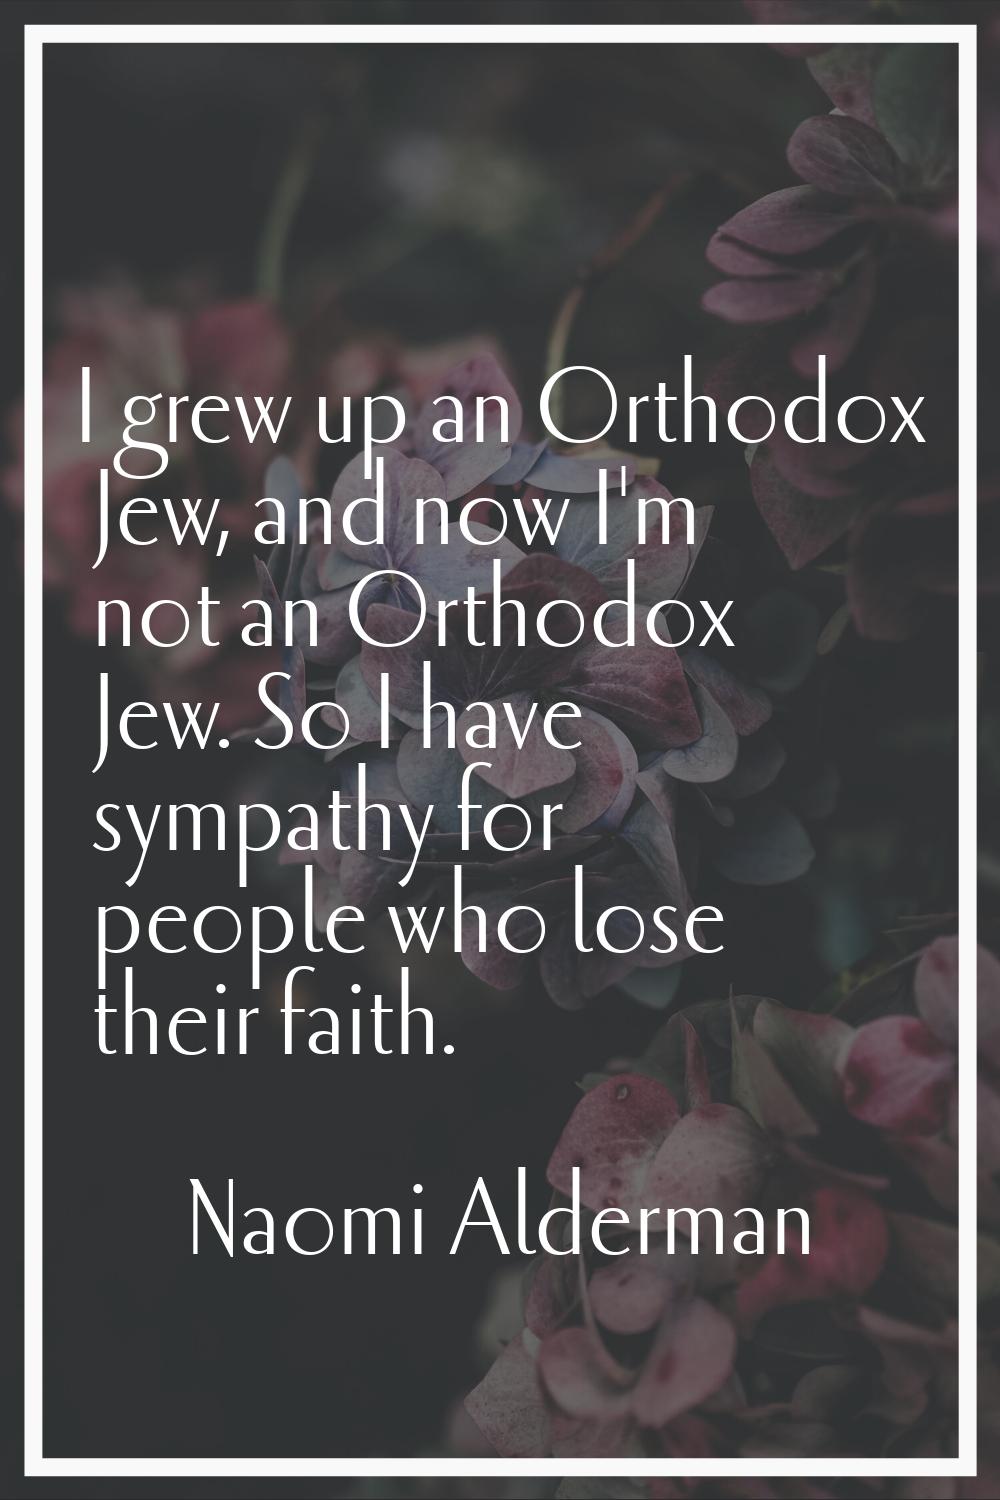 I grew up an Orthodox Jew, and now I'm not an Orthodox Jew. So I have sympathy for people who lose 